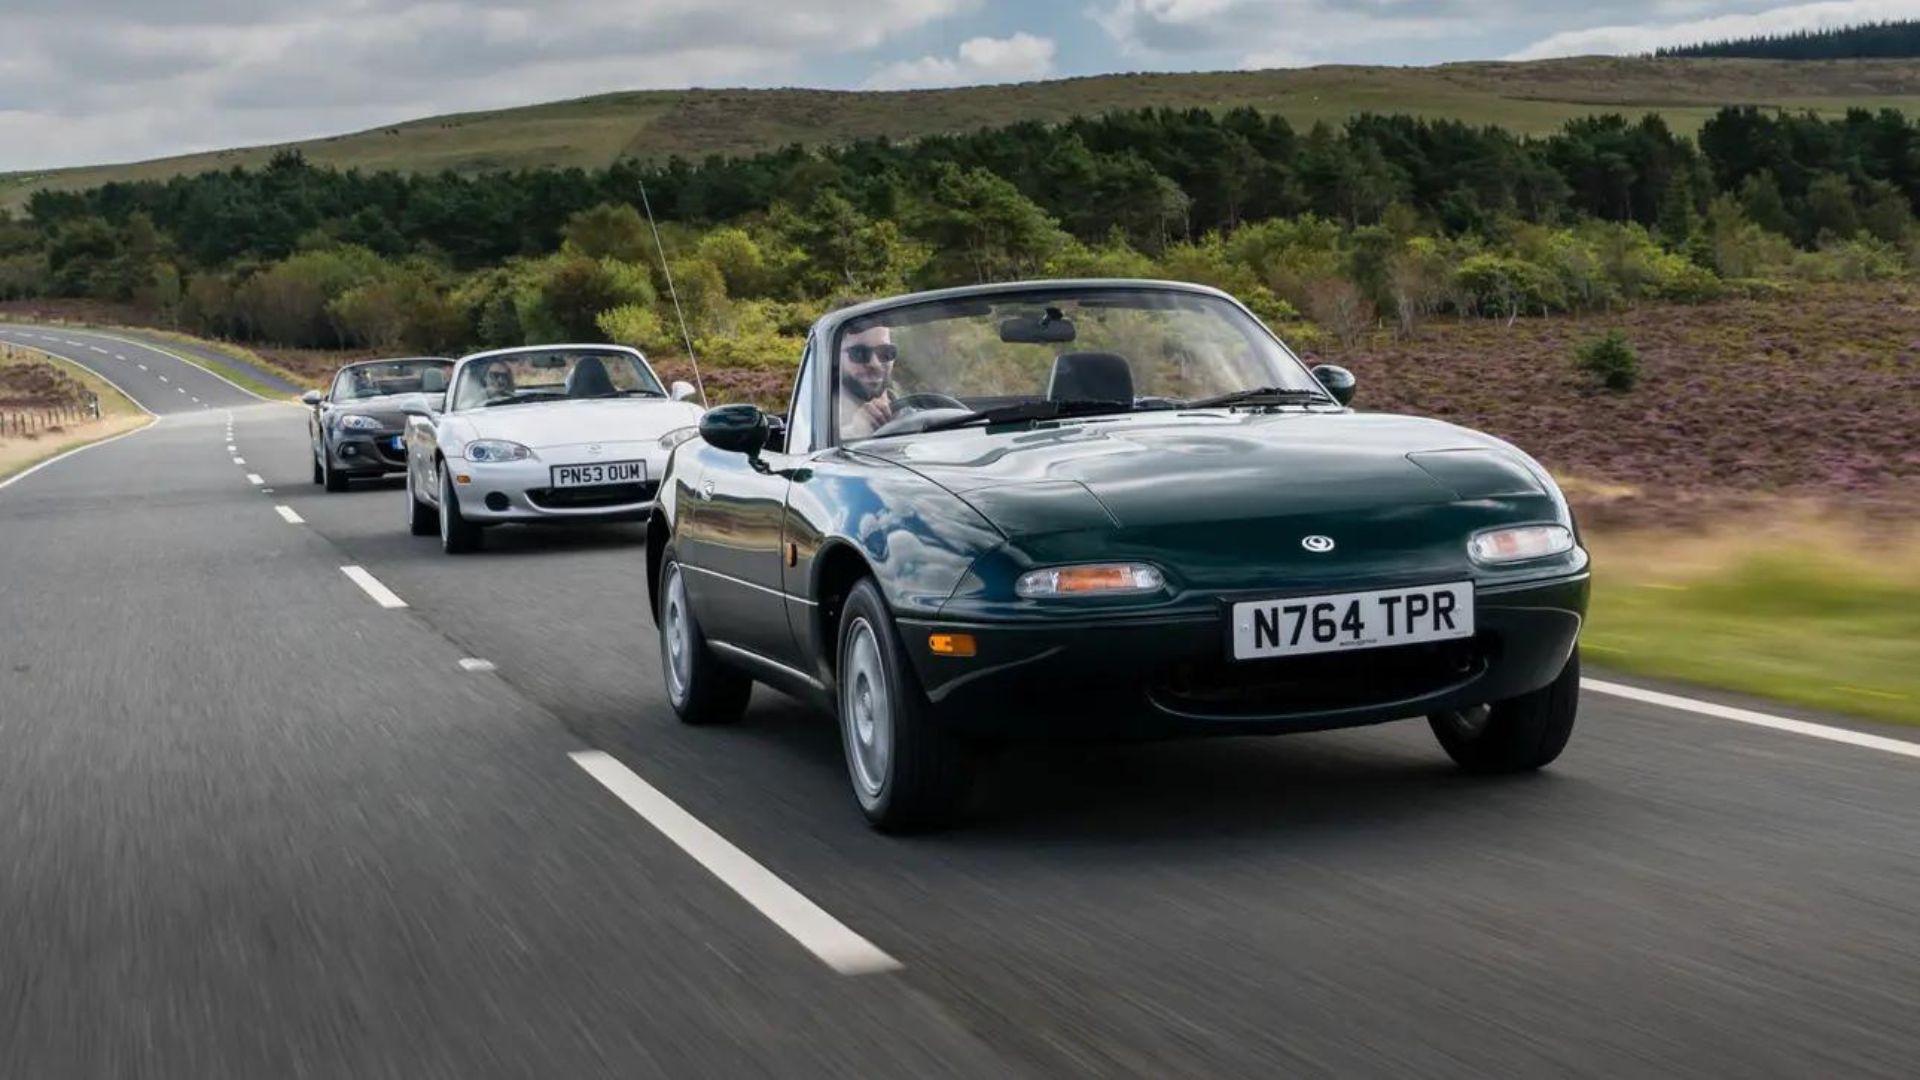 JDM legends that are bargains abroad: Mazda MX-5